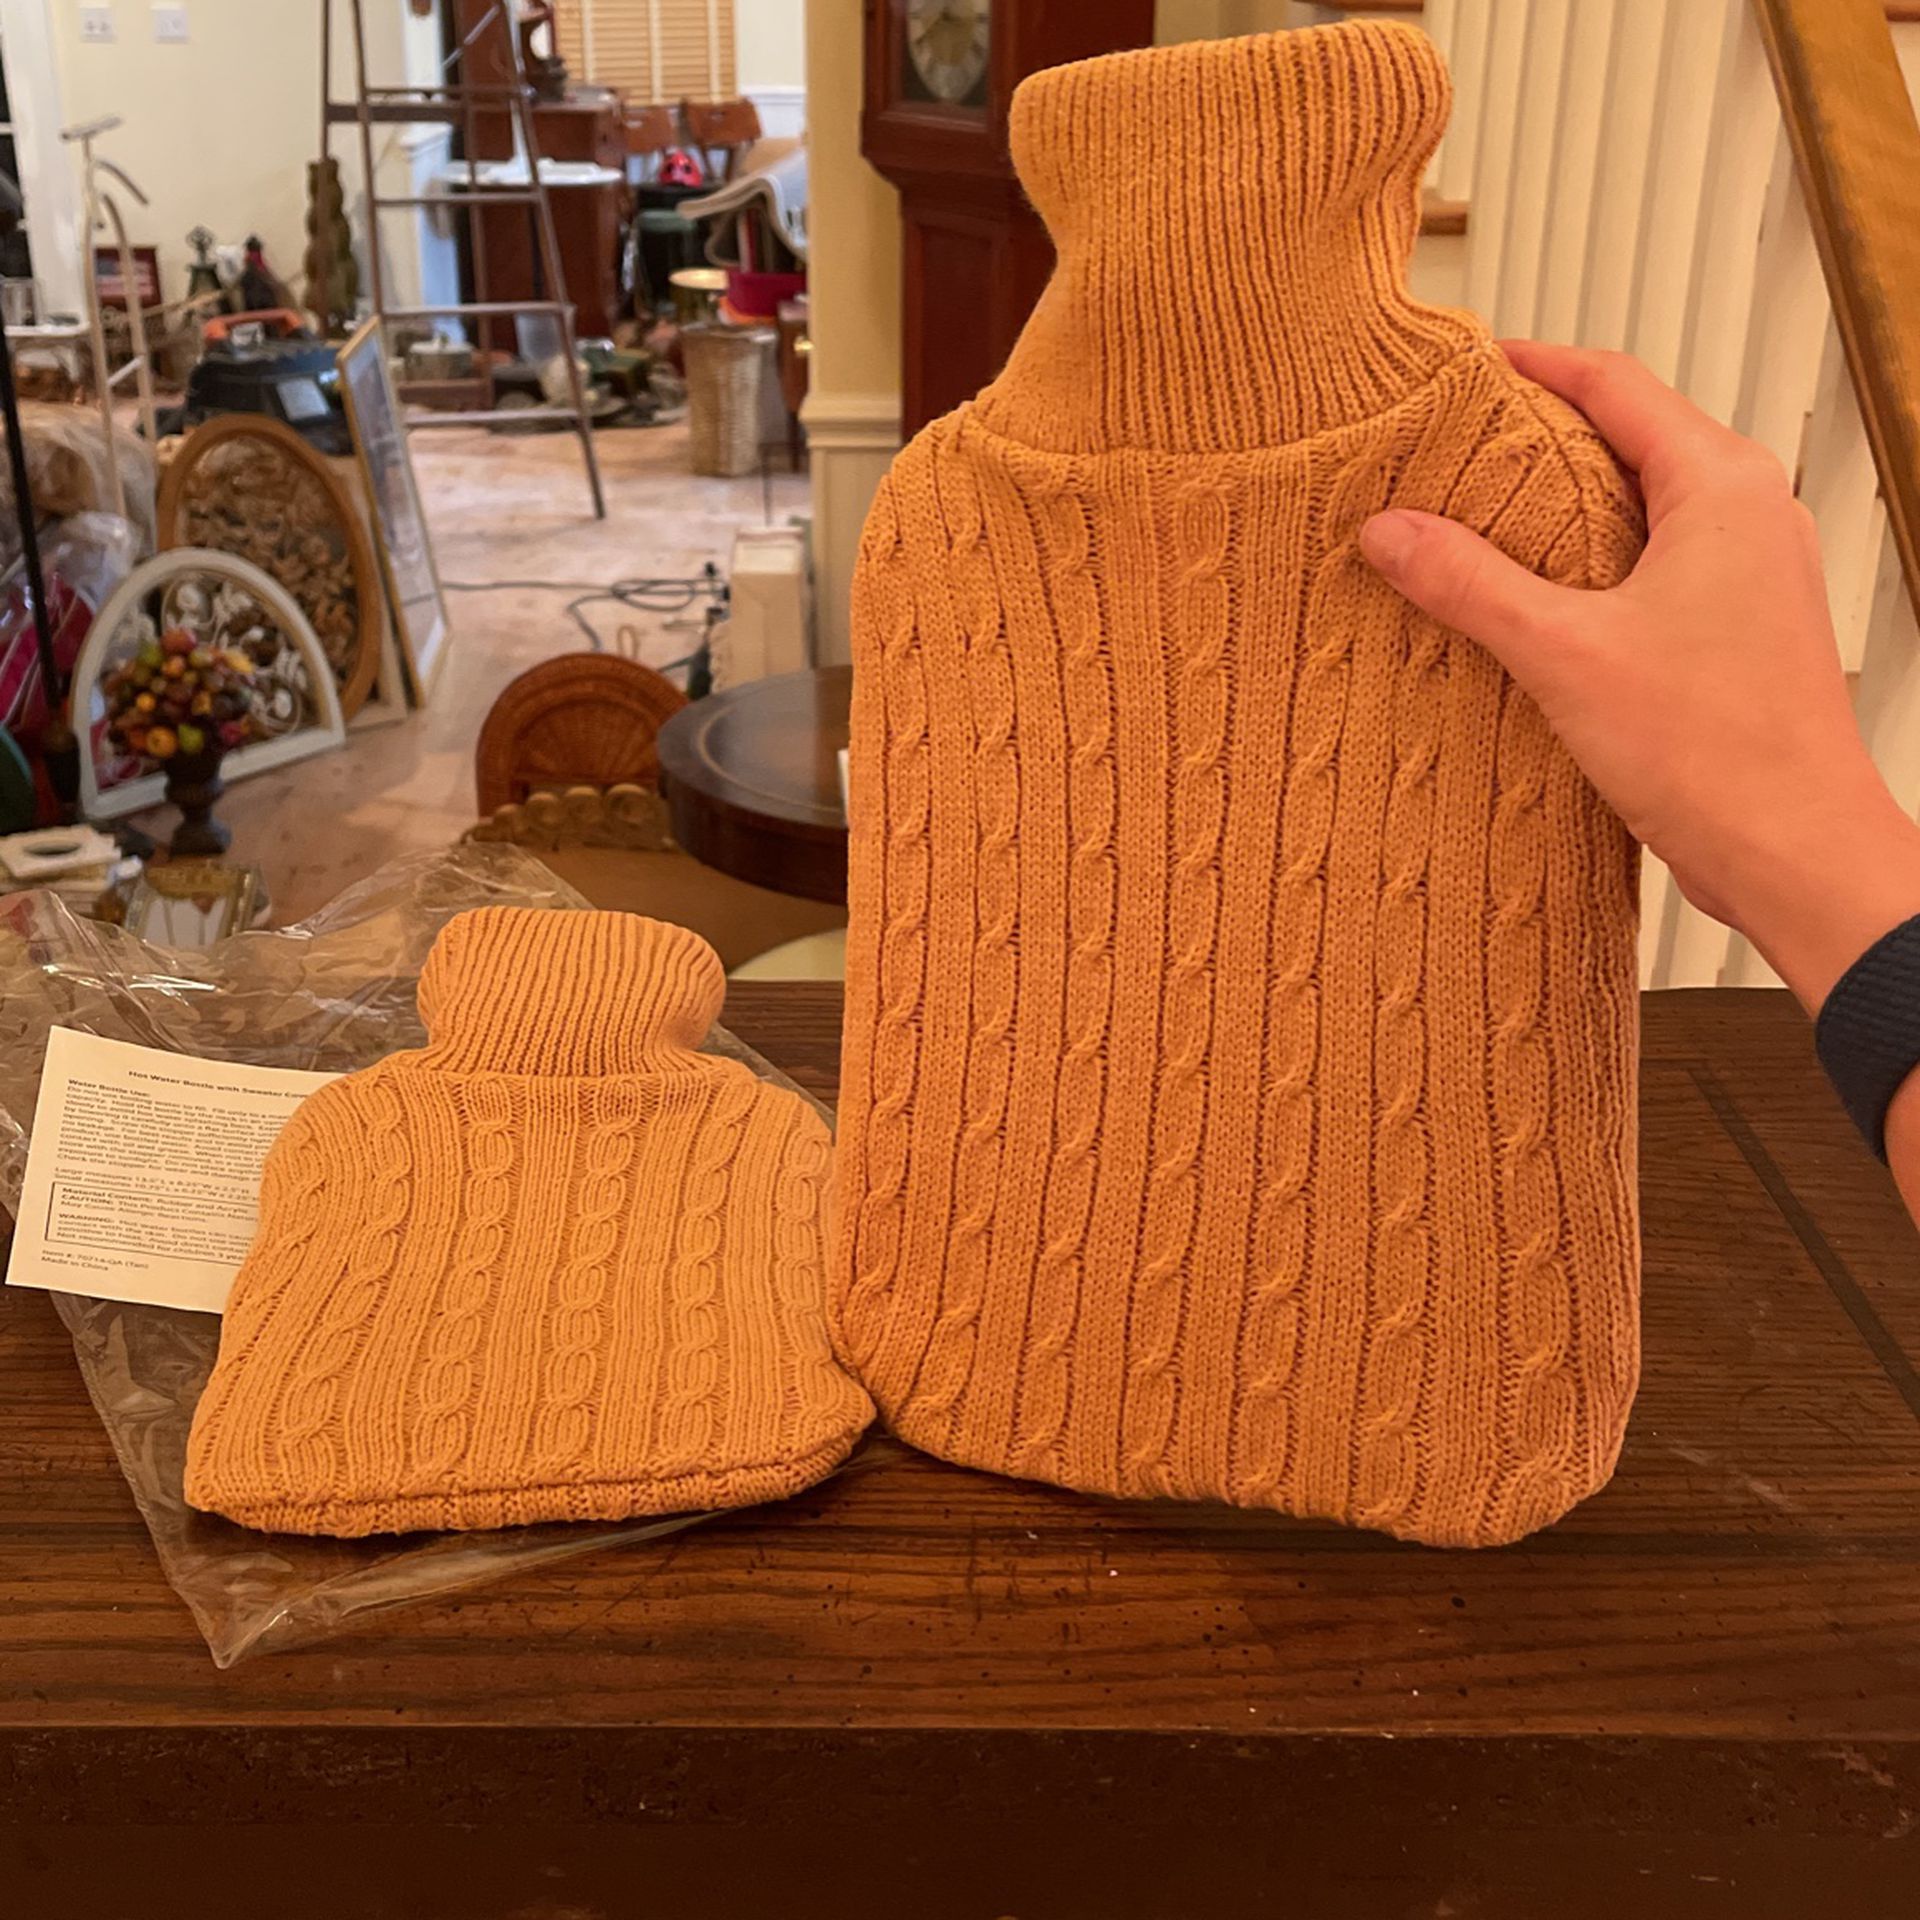 Hot Water Bottles with Sweater Cover